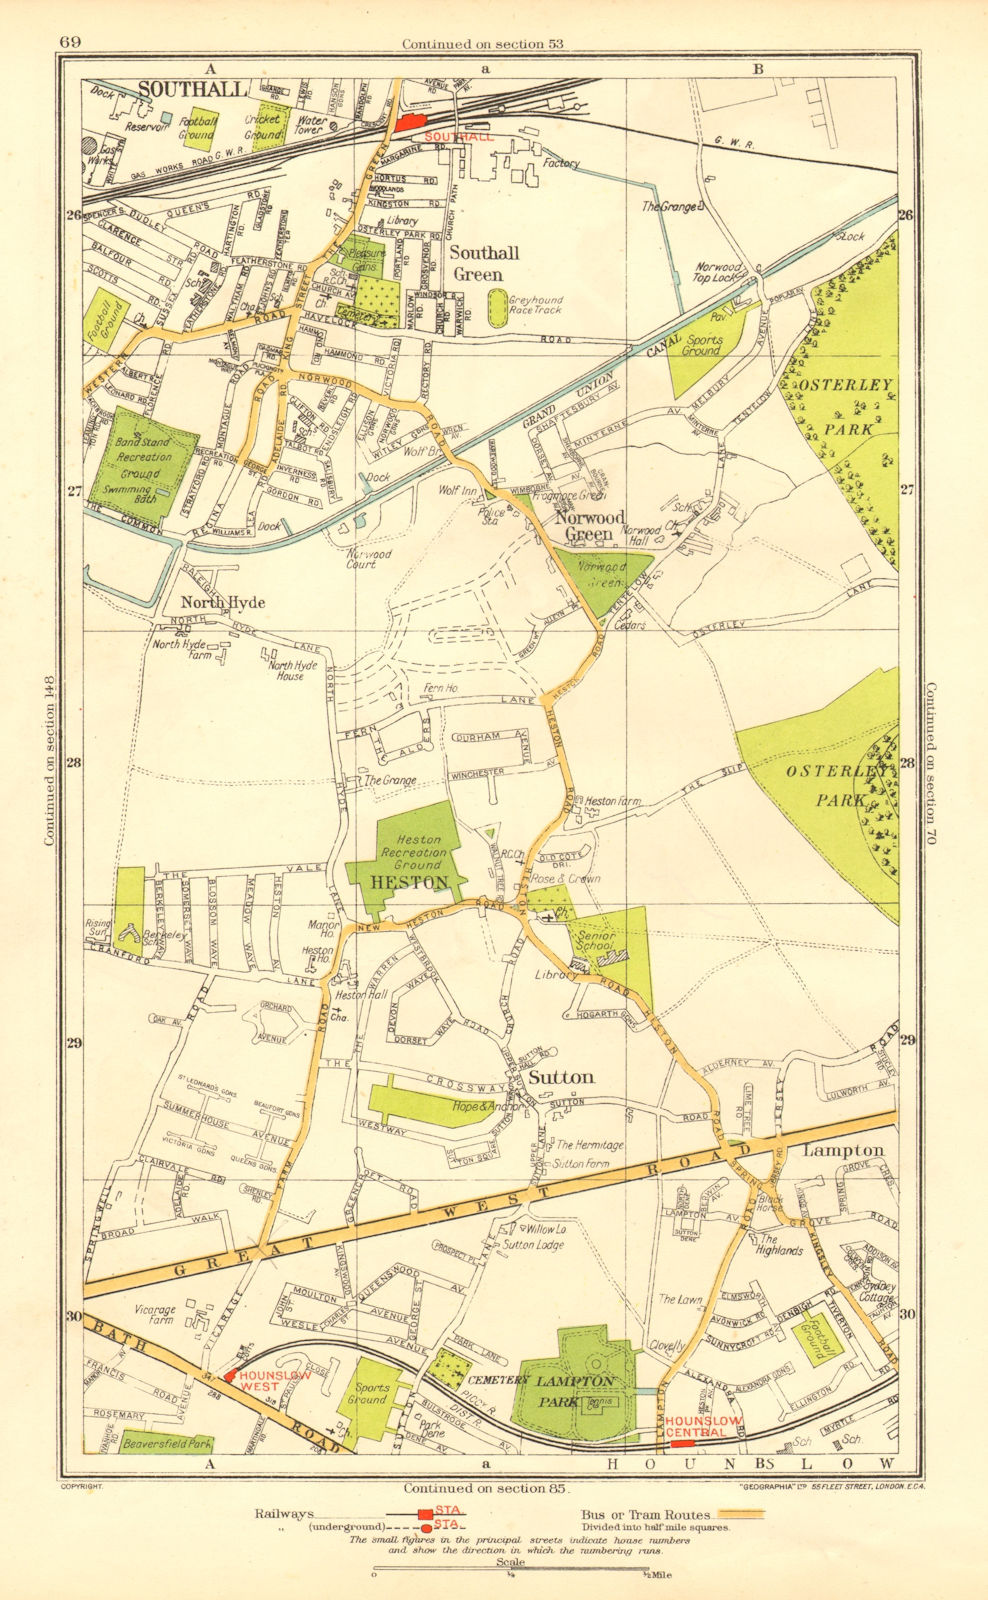 HESTON. Hounslow Lampton Norwood Green Southall North Hyde Sutton 1937 old map